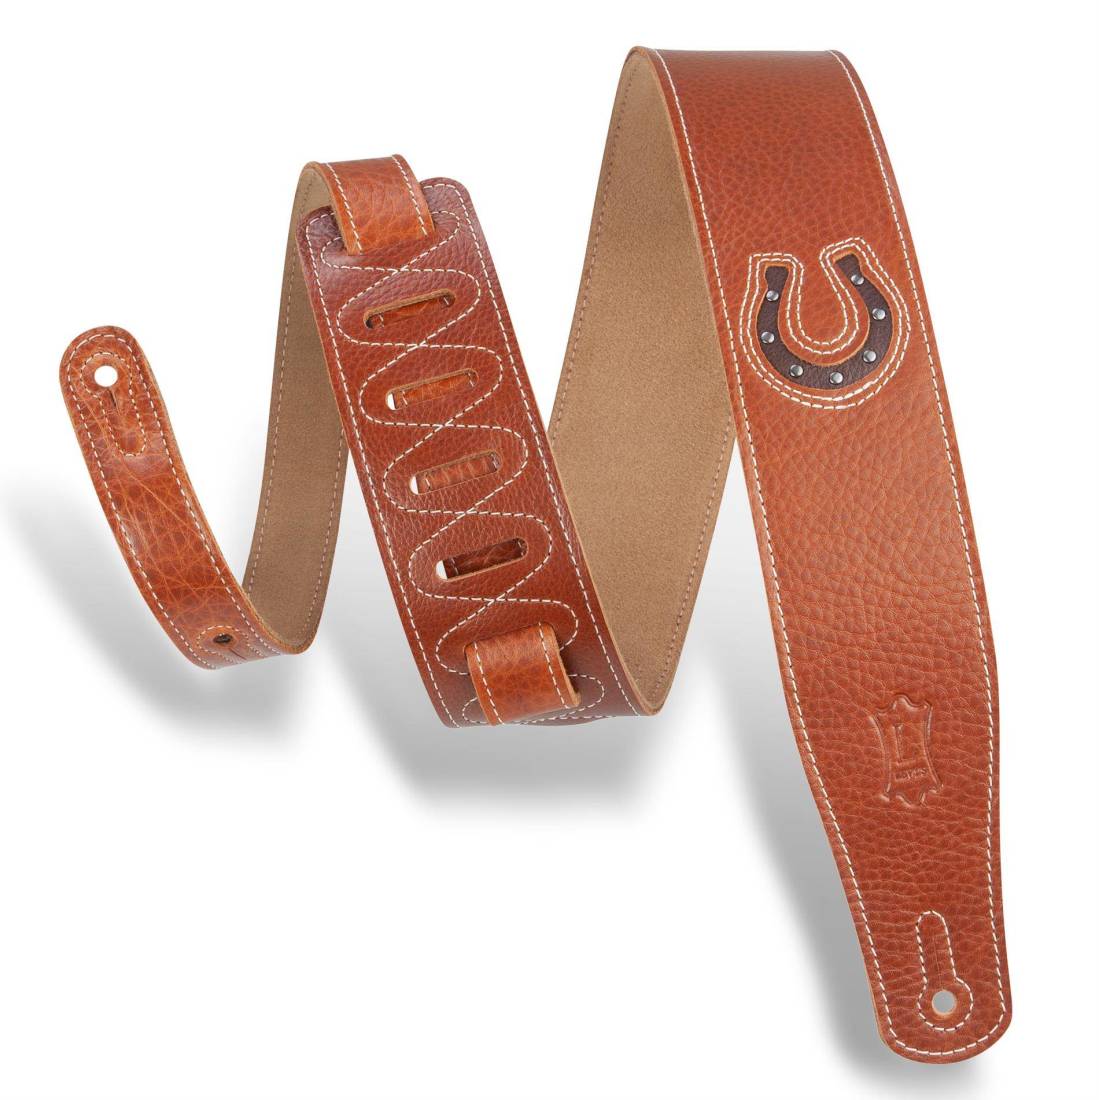 Levy's 2.5'' Lucky Line Leather Guitar Strap - Horseshoe